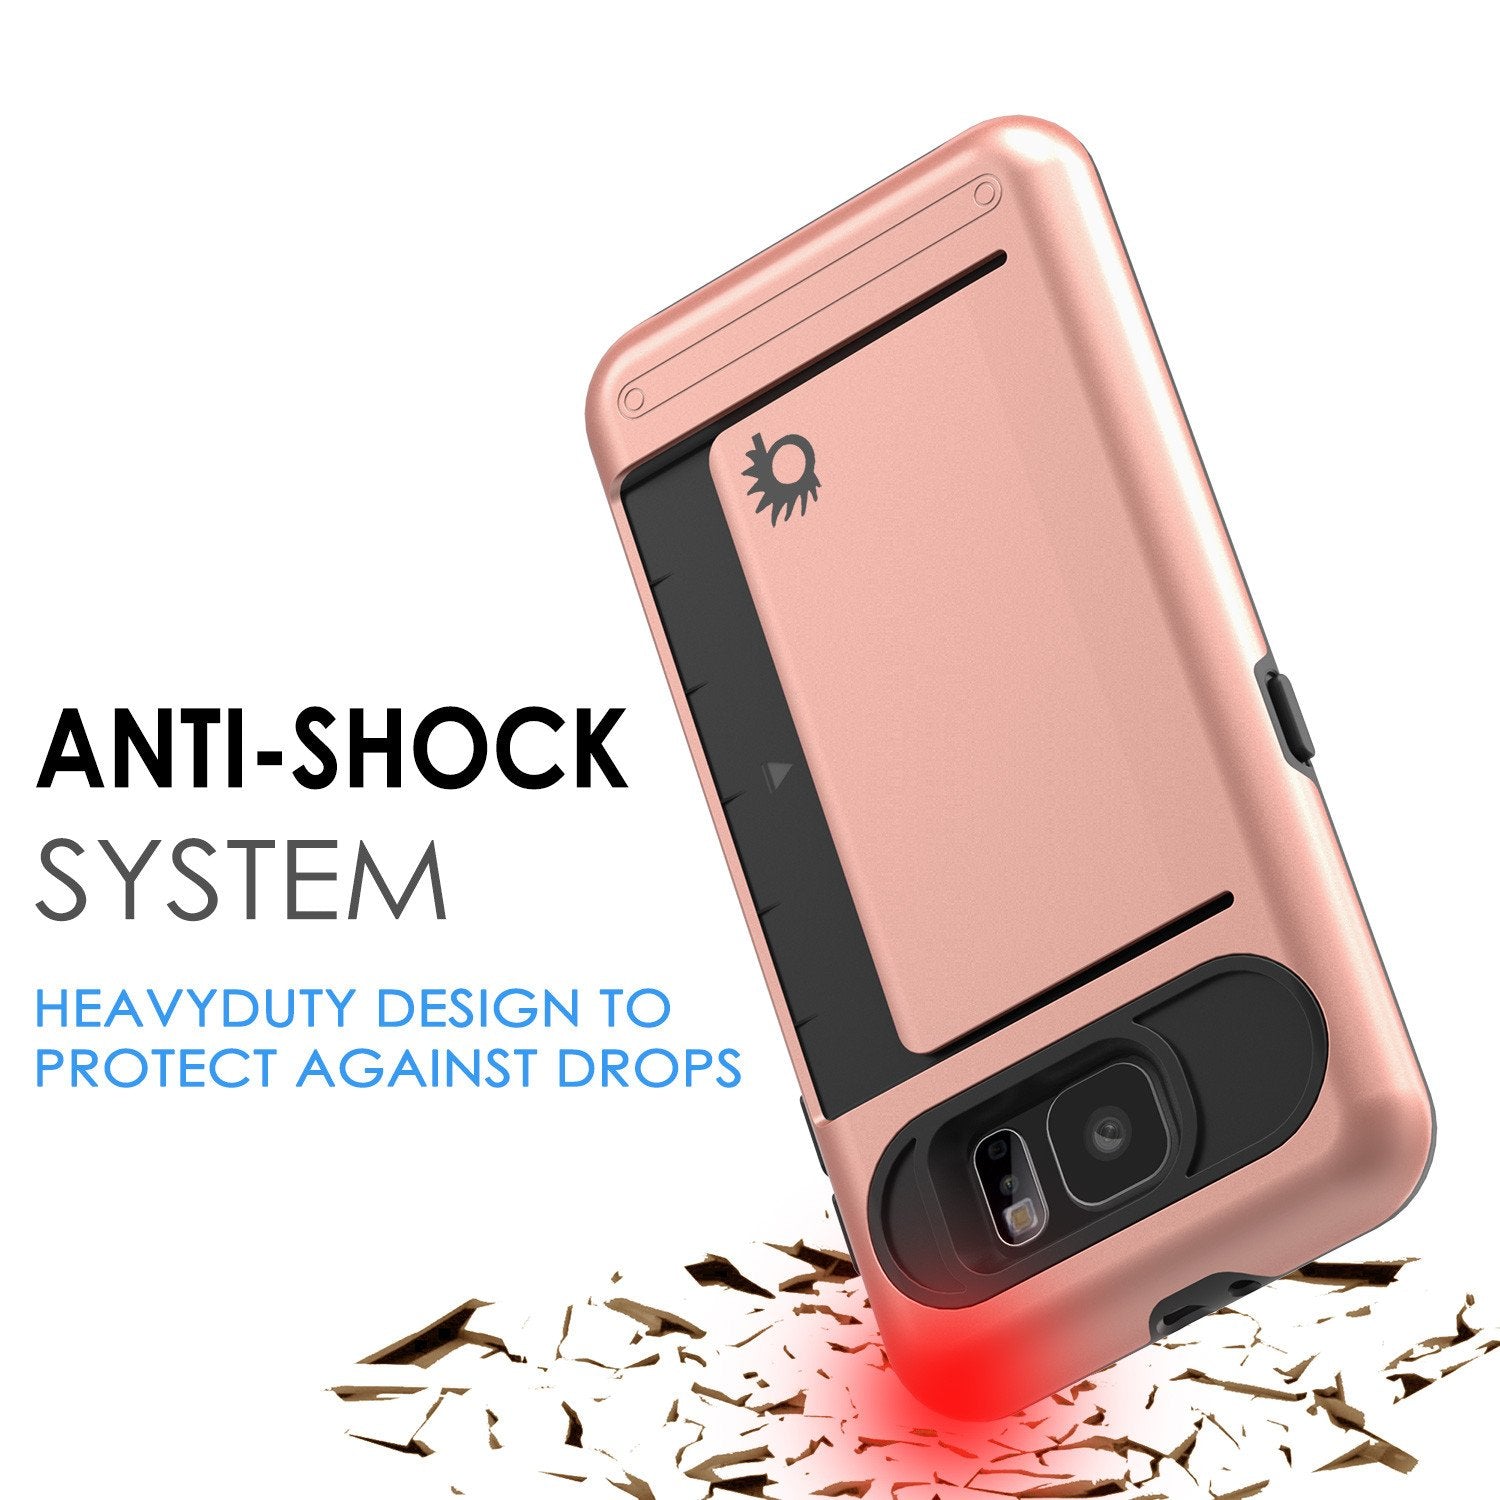 Galaxy s6 Case PunkCase CLUTCH Rose Gold Series Slim Armor Soft Cover Case w/ Tempered Glass